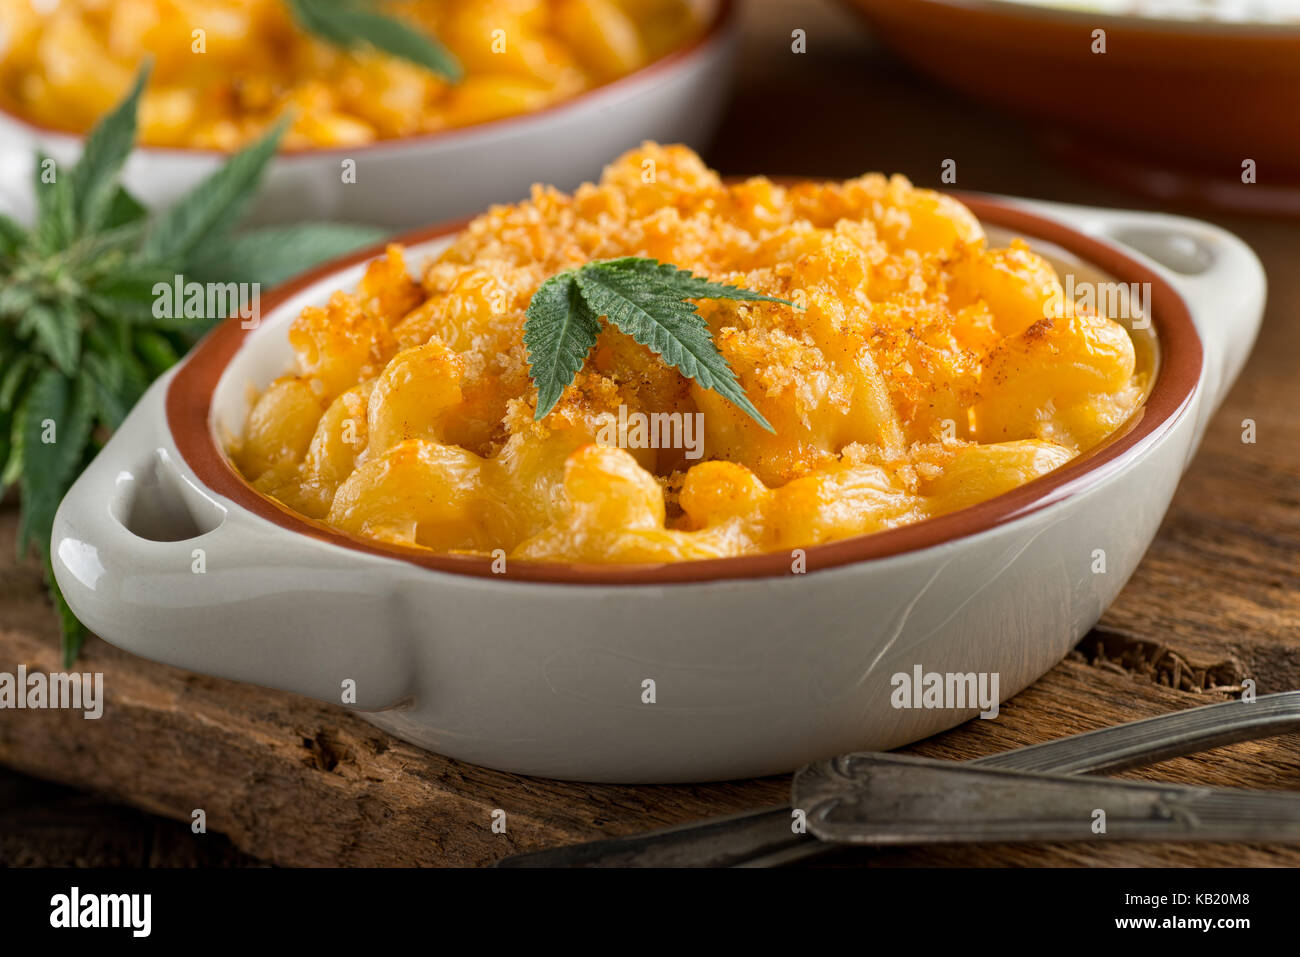 A bowl of delicious homemade weed mac and cheese with marijuana leaf garnish. Stock Photo